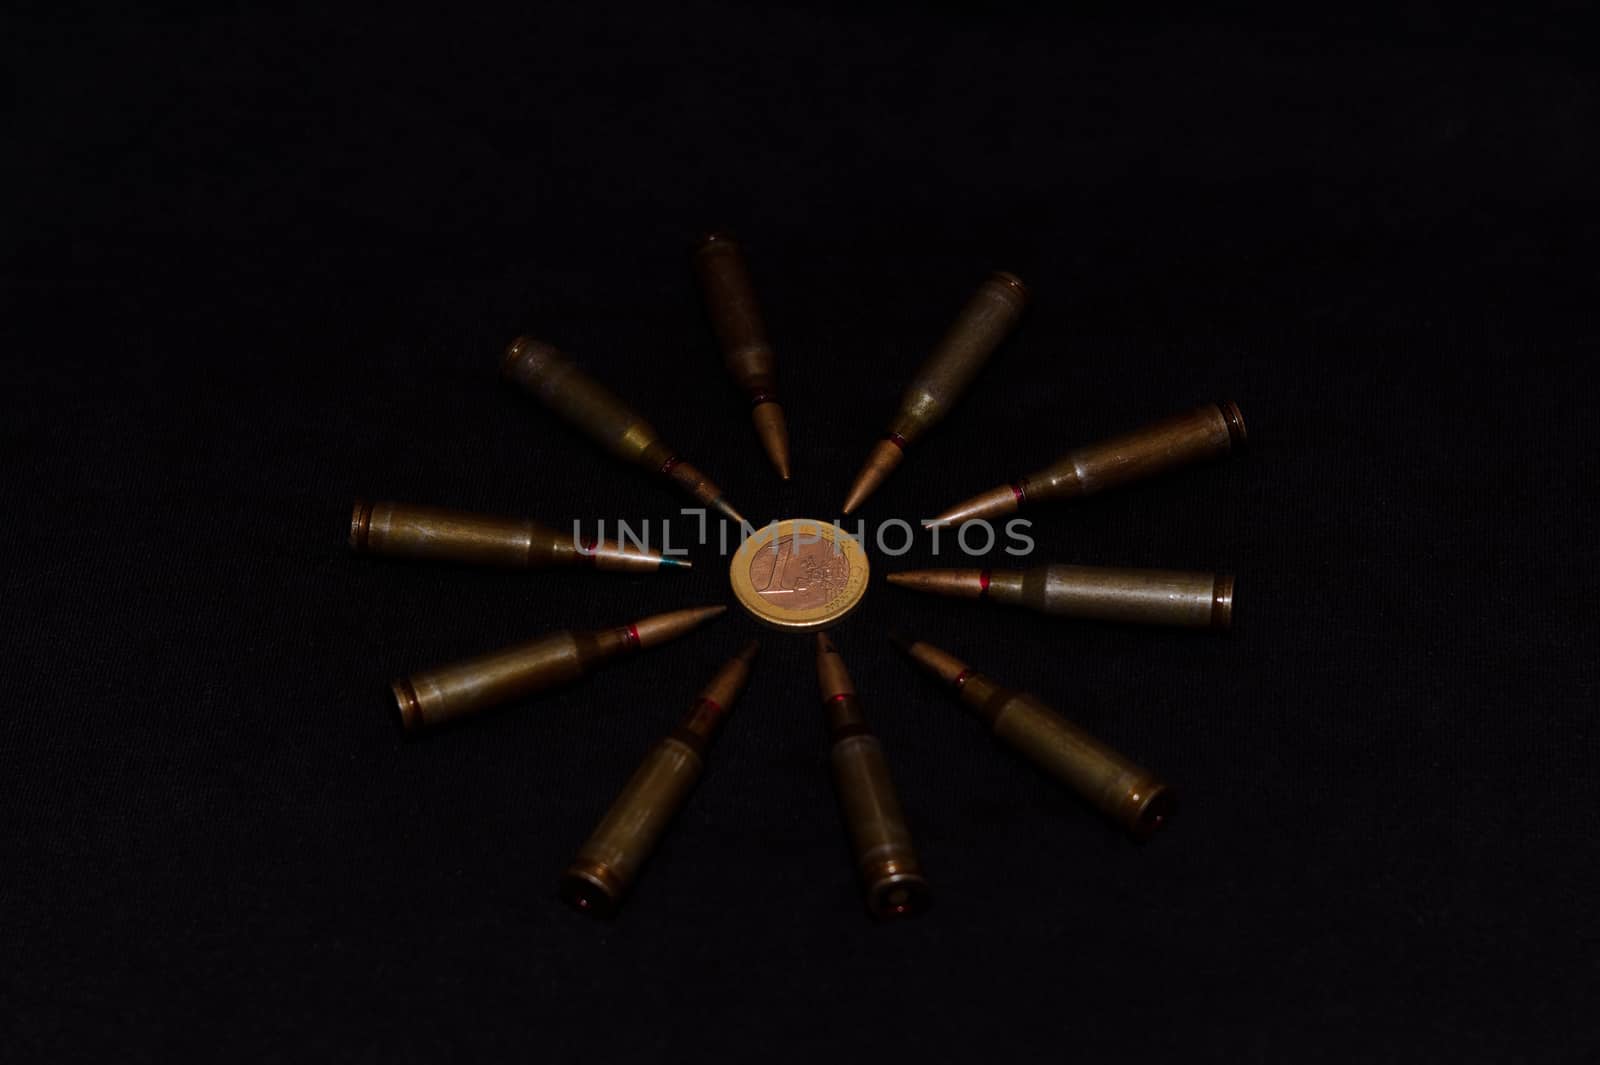 Rifle ammo around one euro coin on black background. Symbolizes the war for money and one of the world's problems. by alexsdriver